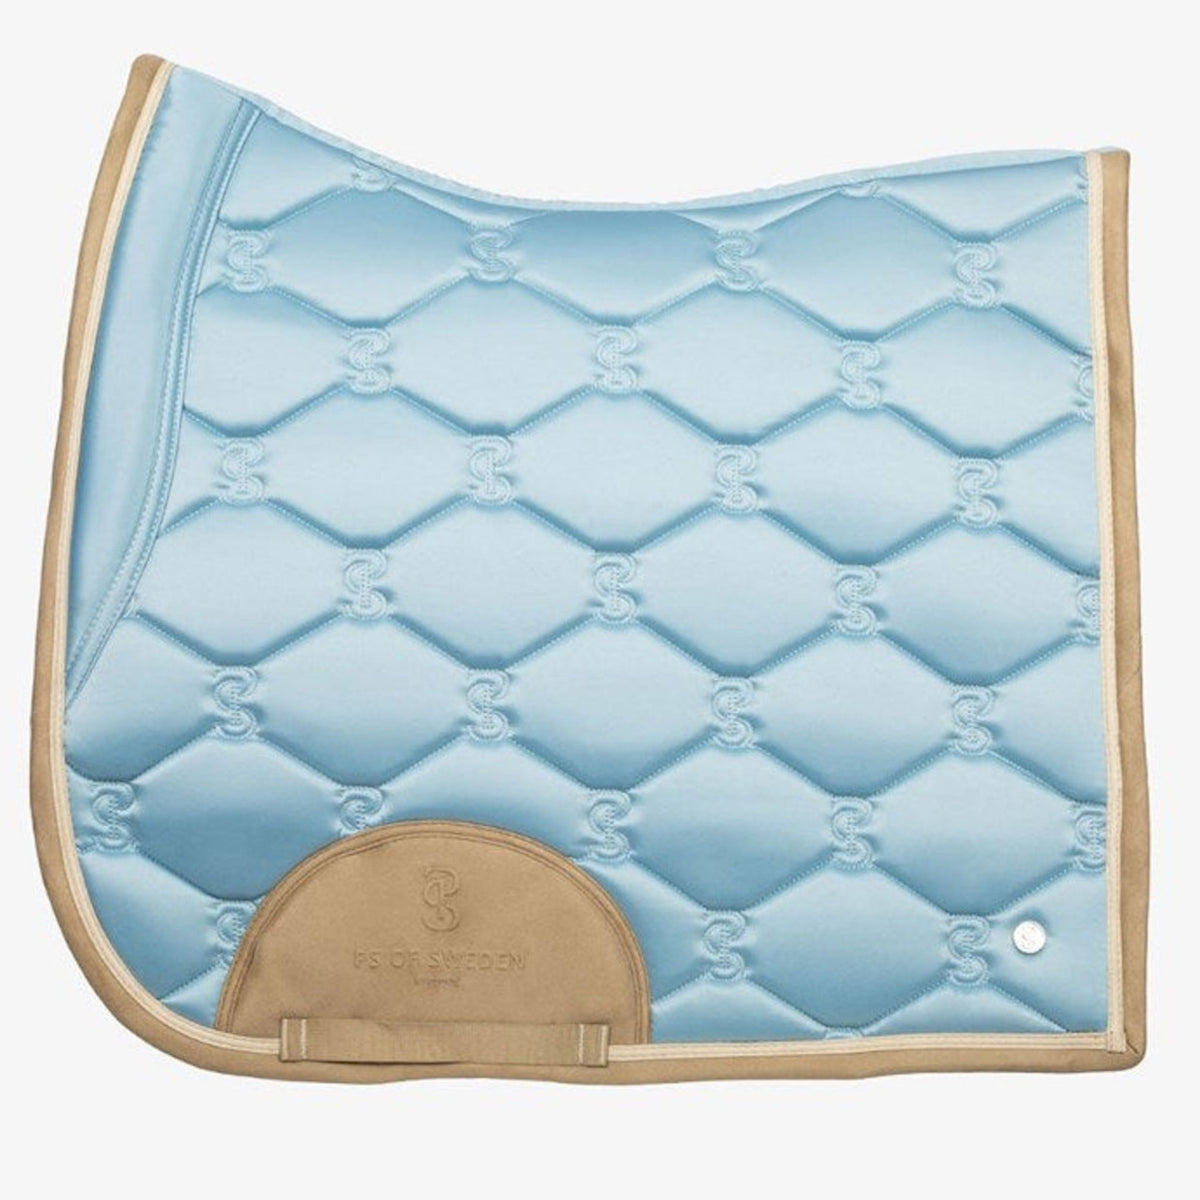 front view of psos stone blue dressage saddle pad.